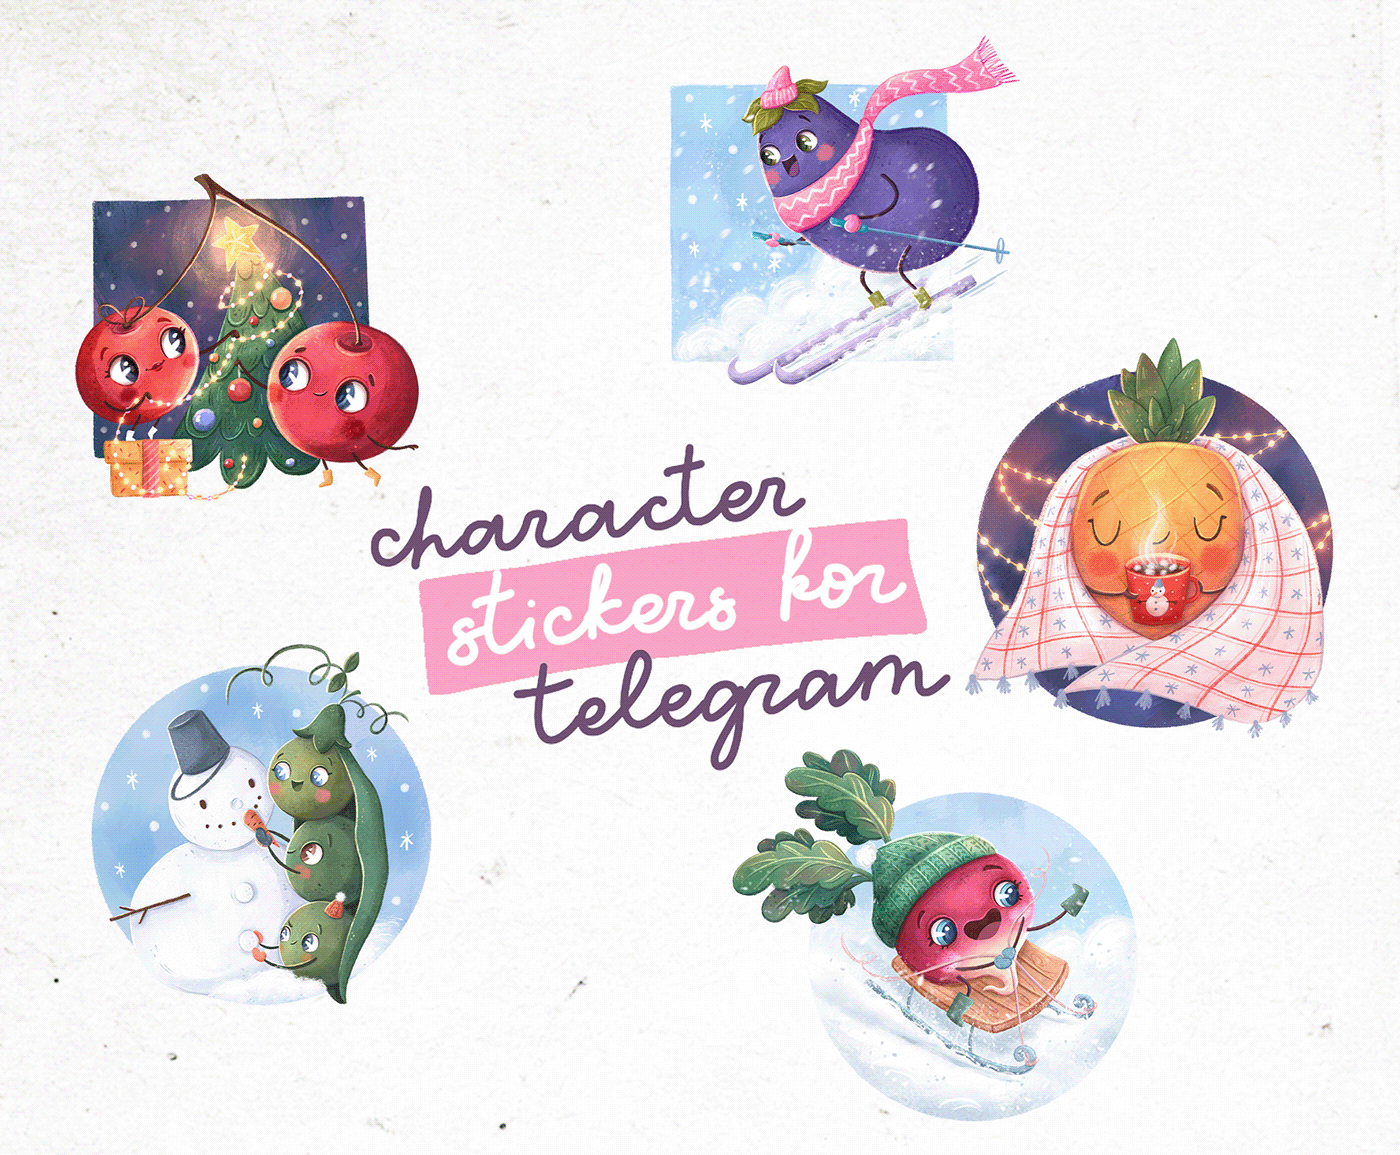 stickers Character design  digital illustration Telegram children illustration cute illustration vegetables fruits Christmas new year